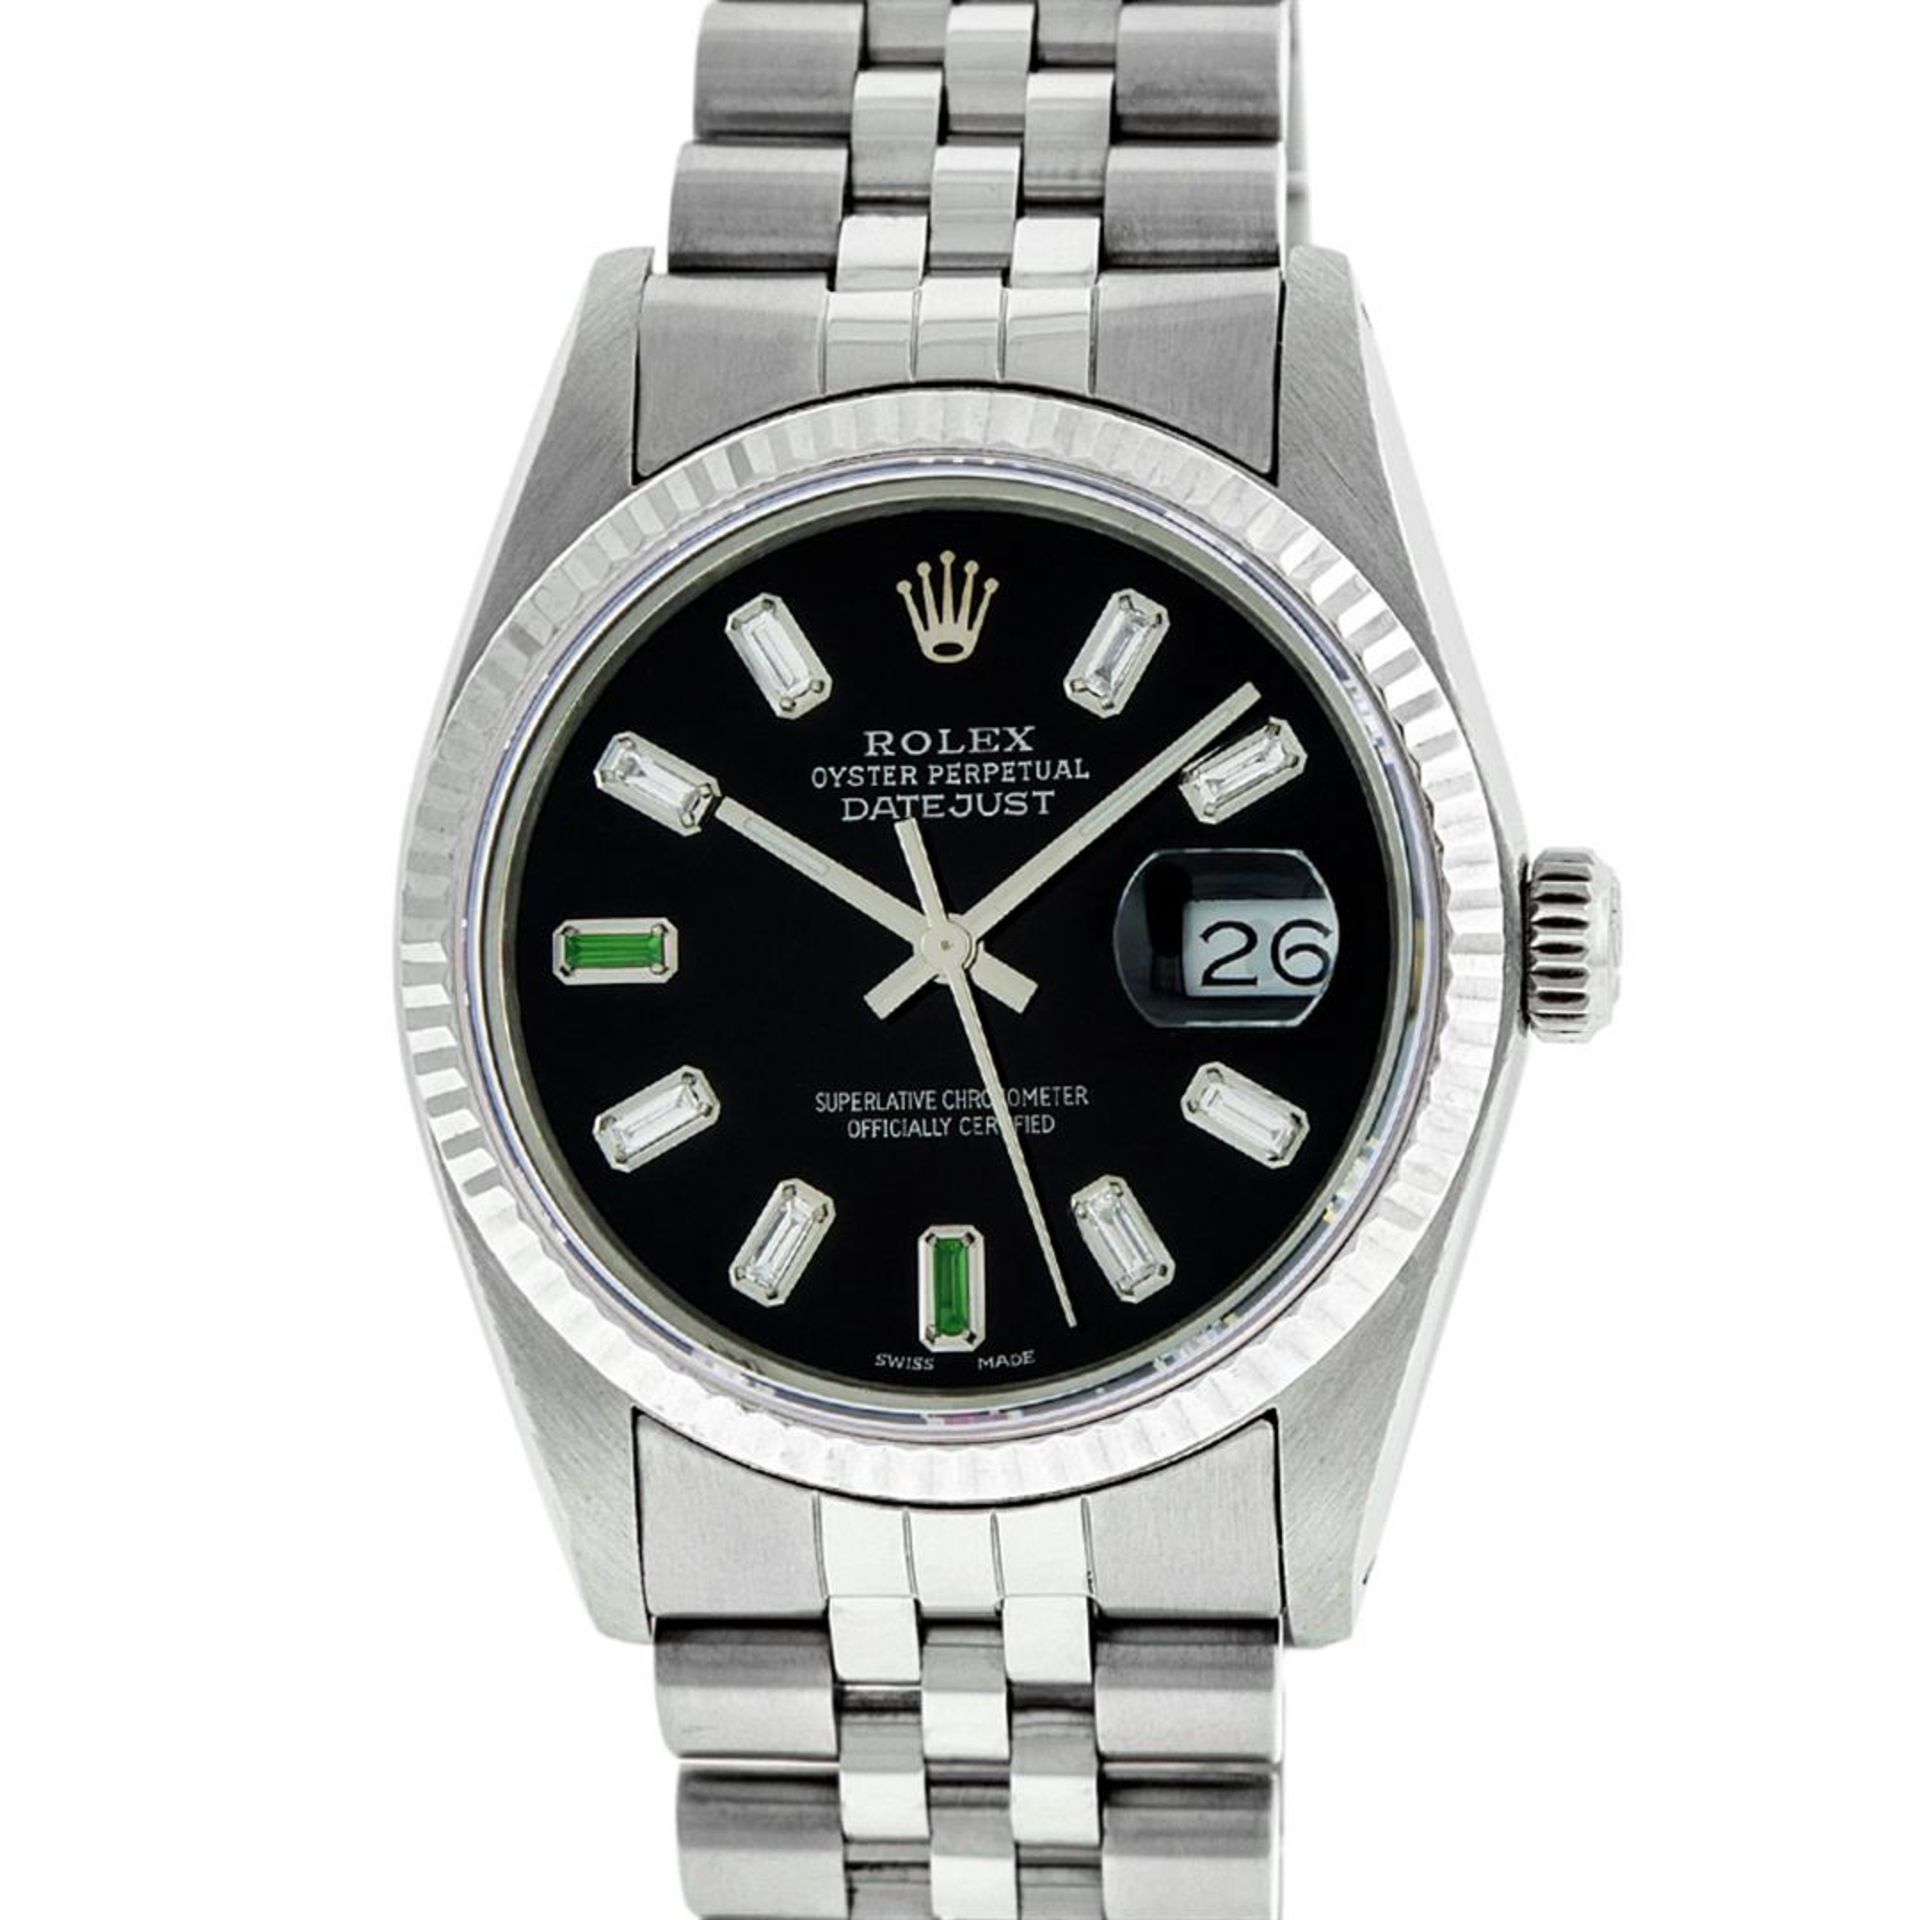 Rolex Mens Stainless Steel 36mm Black Diamond Dial Datejust Wristwatch - Image 2 of 8